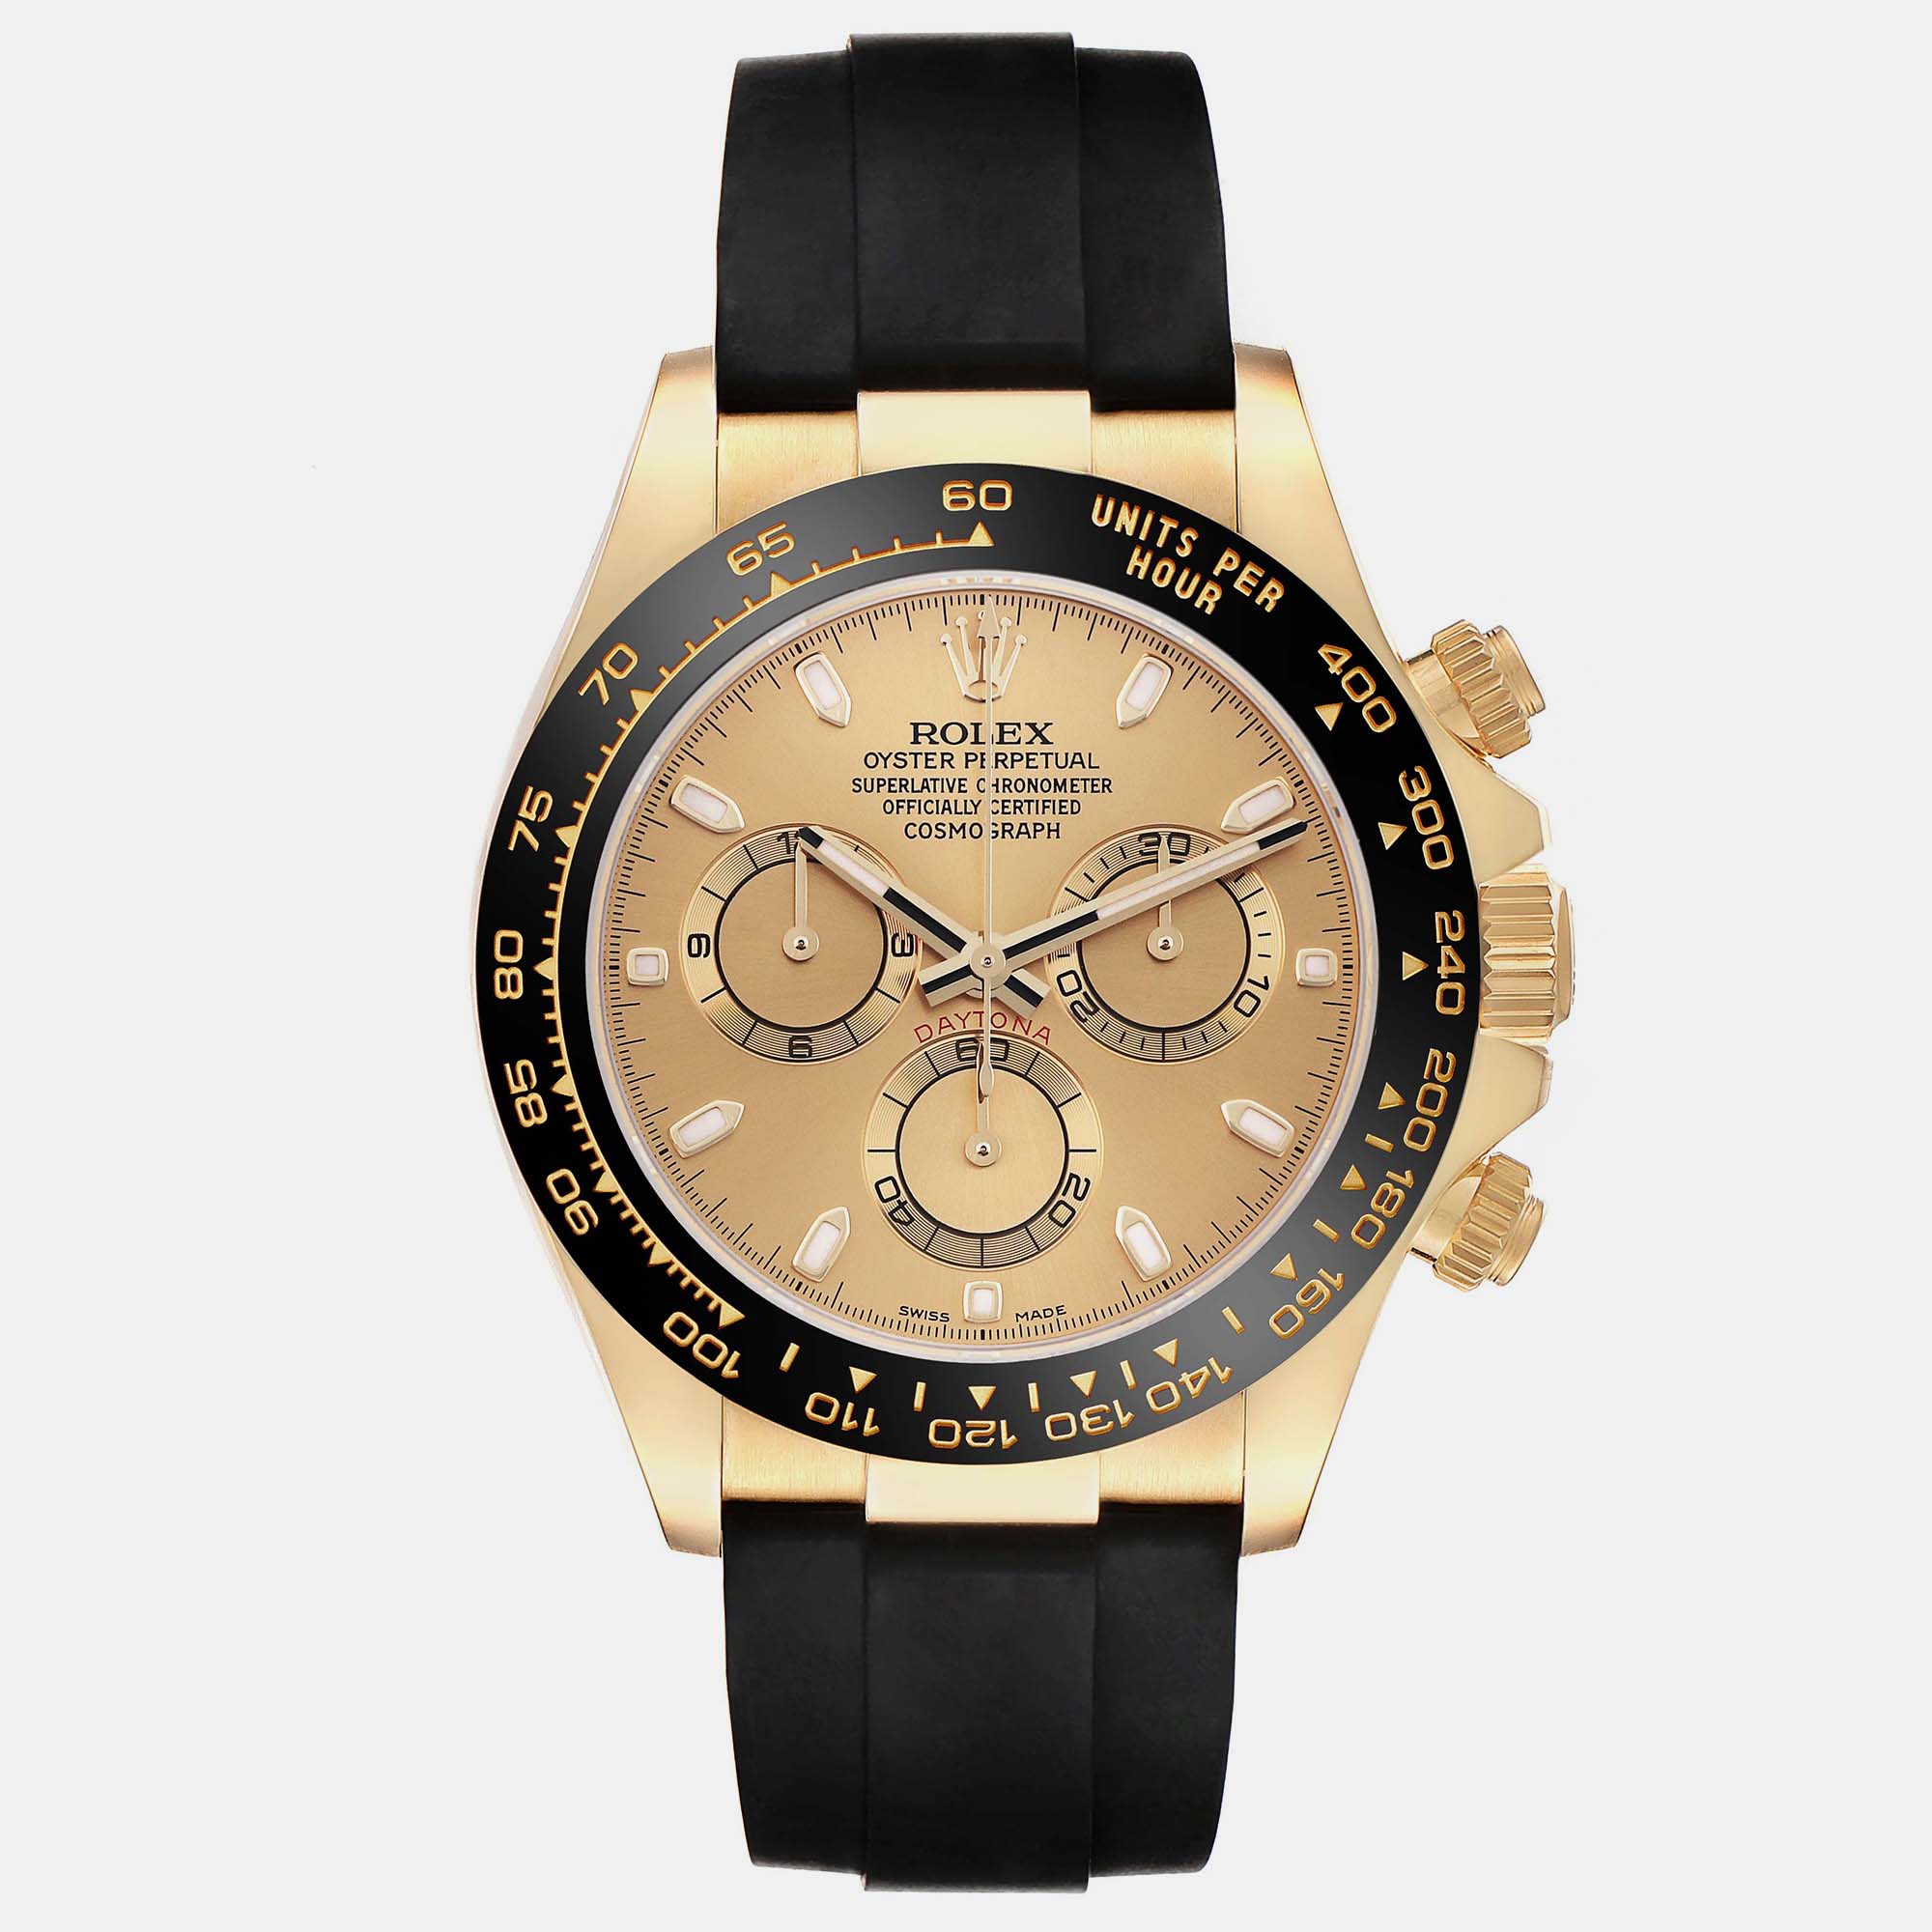 Pre-owned Rolex Daytona Yellow Gold Champagne Dial Mens Watch 116518 40 Mm